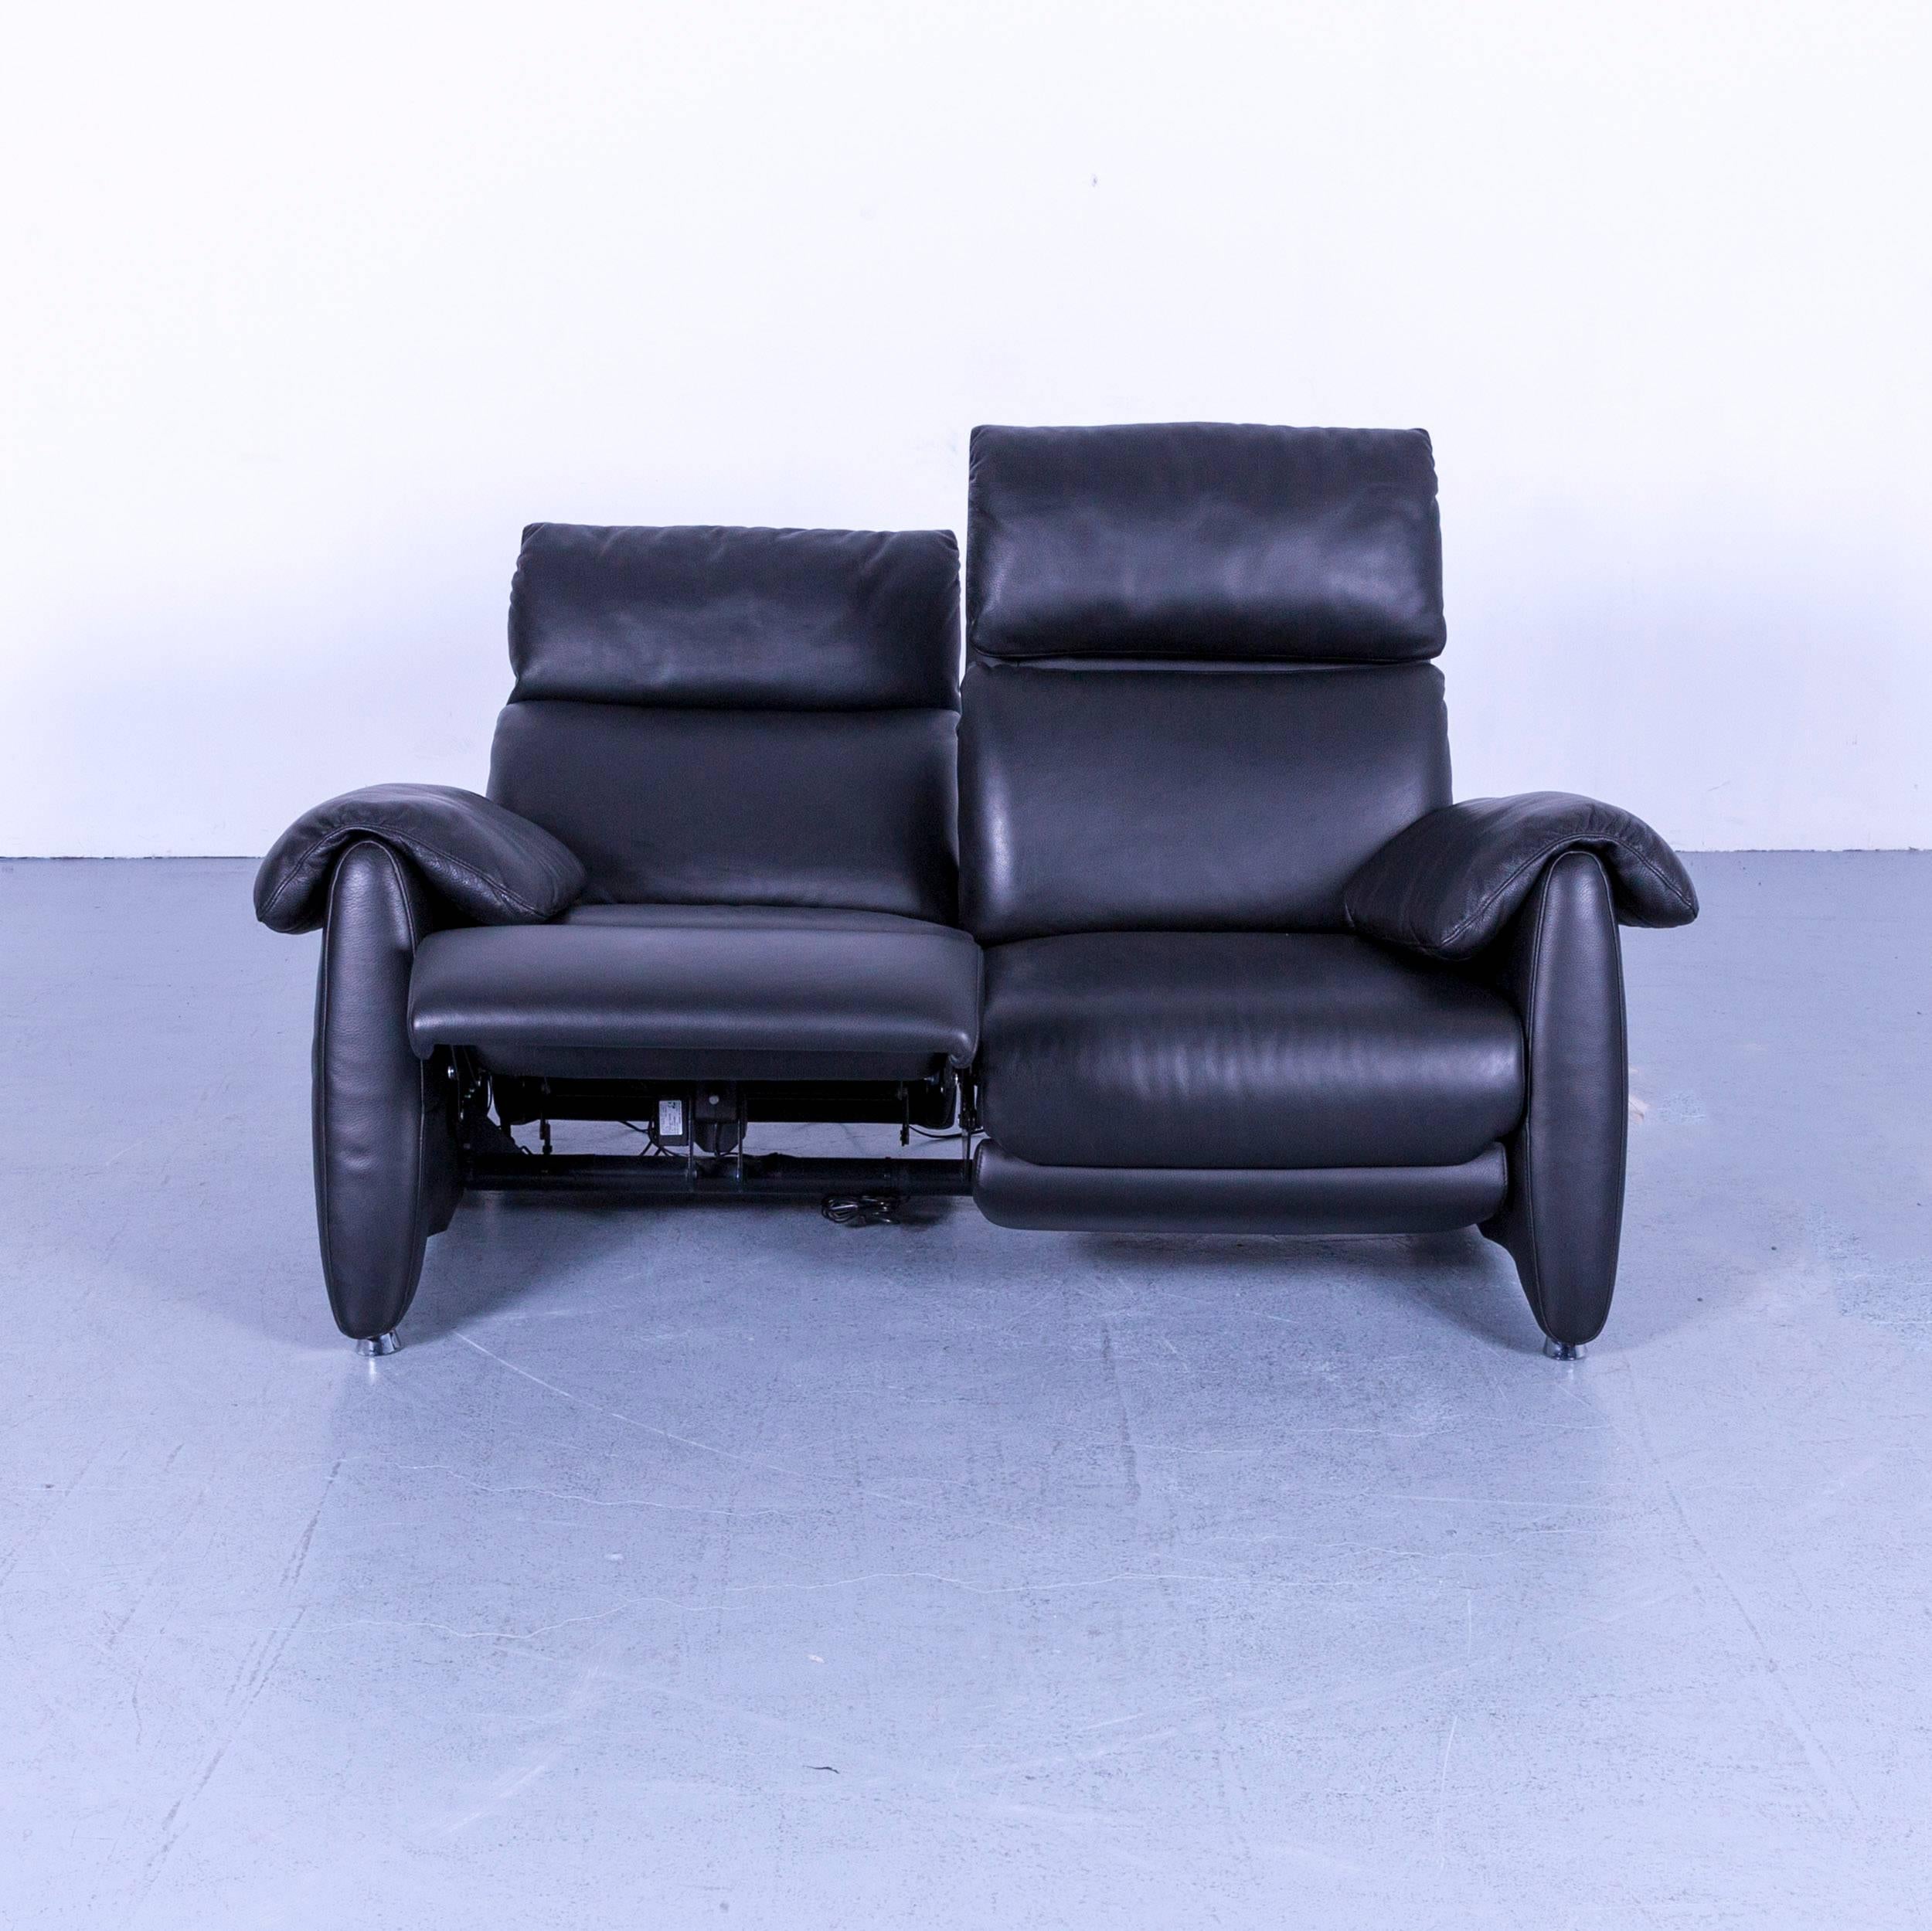 An designer sofa leather black two-seat couch modern electric recliner.
















   